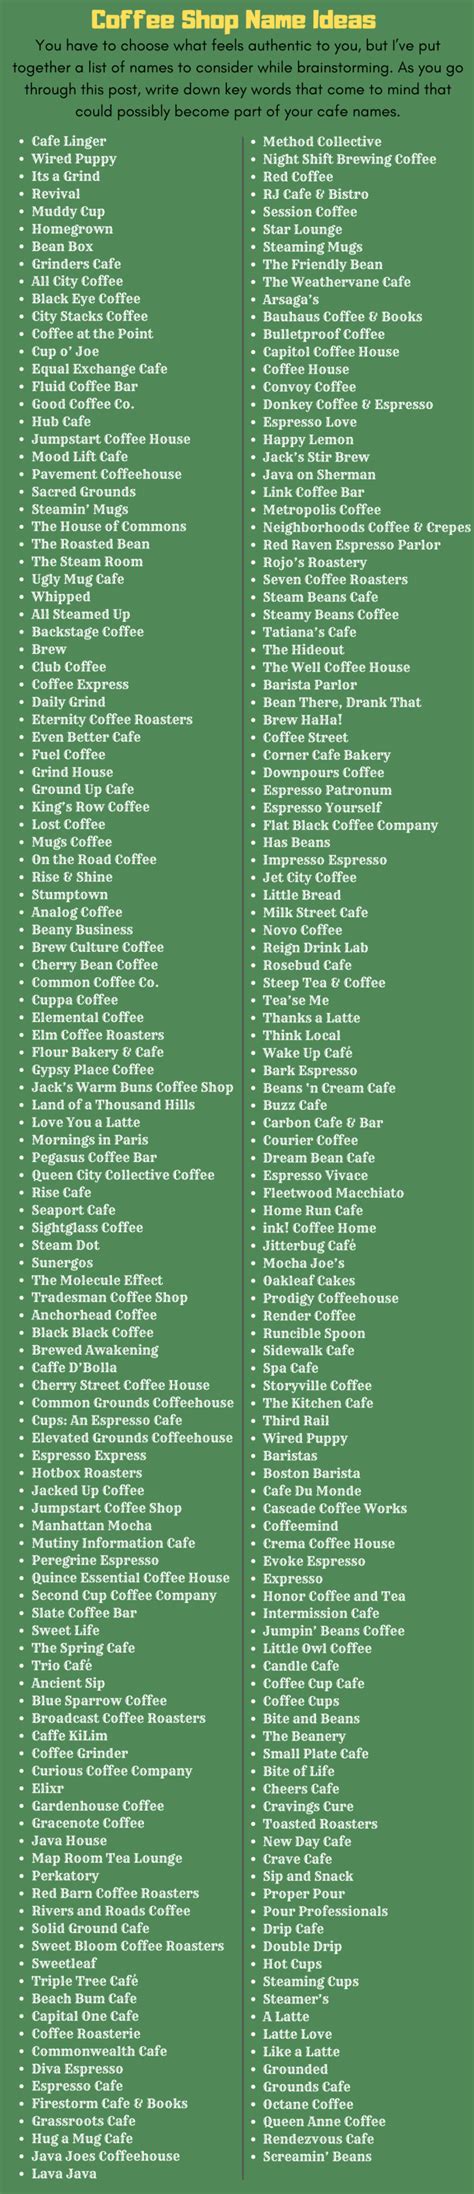 500 Inspiring Cafe And Coffee Shop Name Ideas